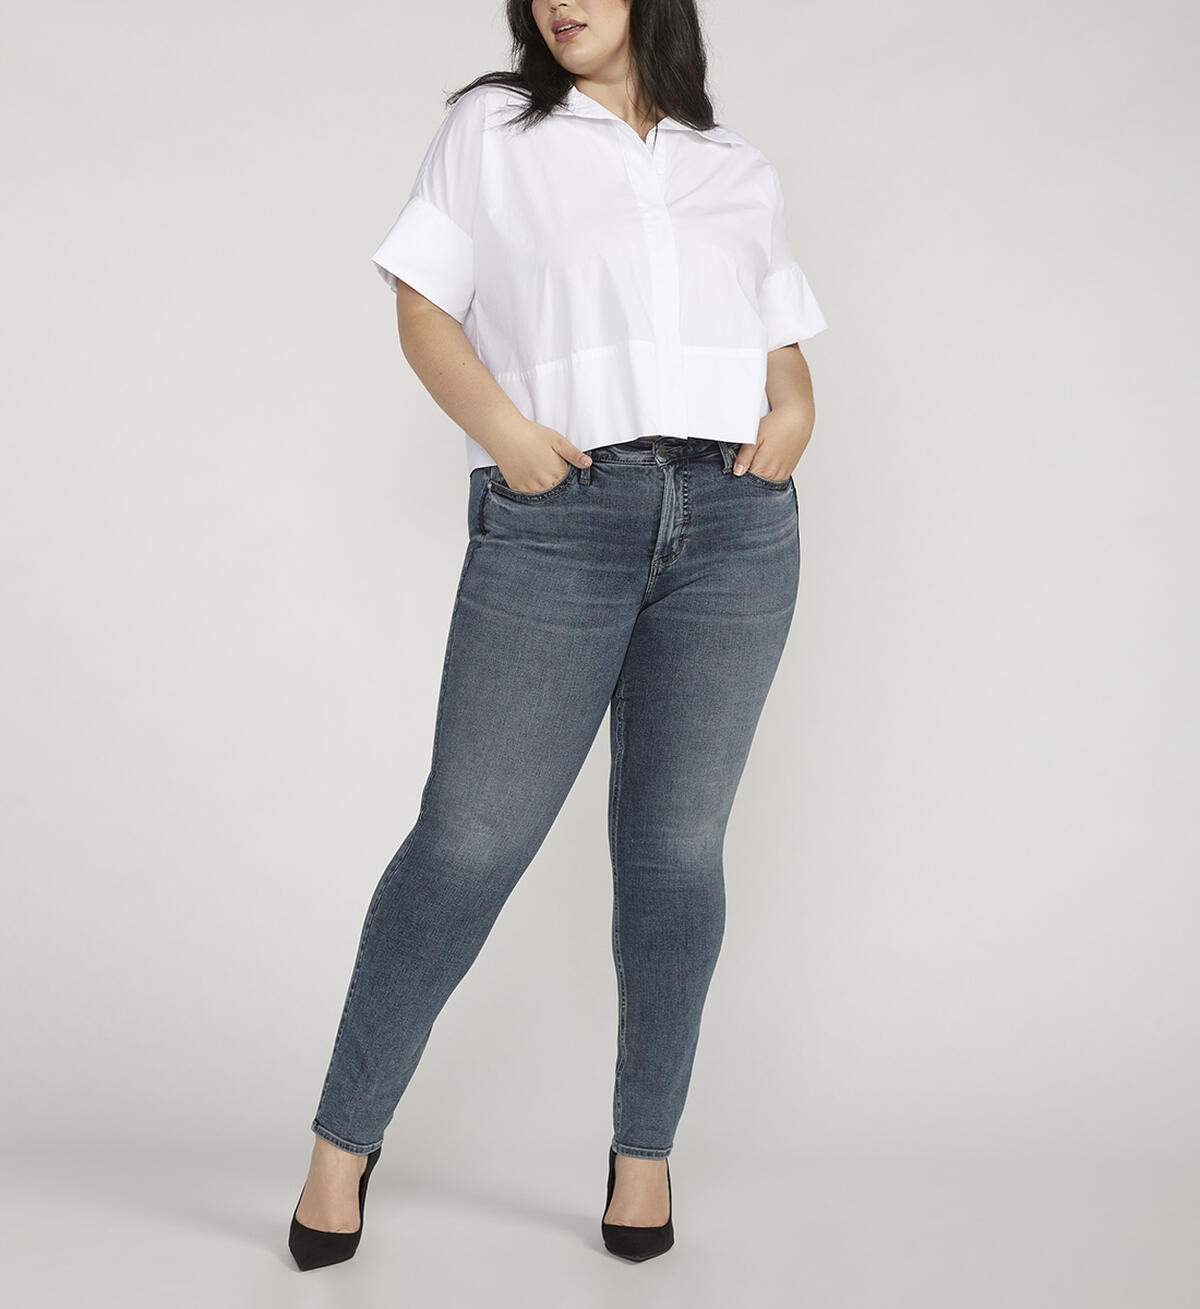 Most Wanted Mid Rise Straight Leg Jeans Plus Size, Indigo, hi-res image number 0